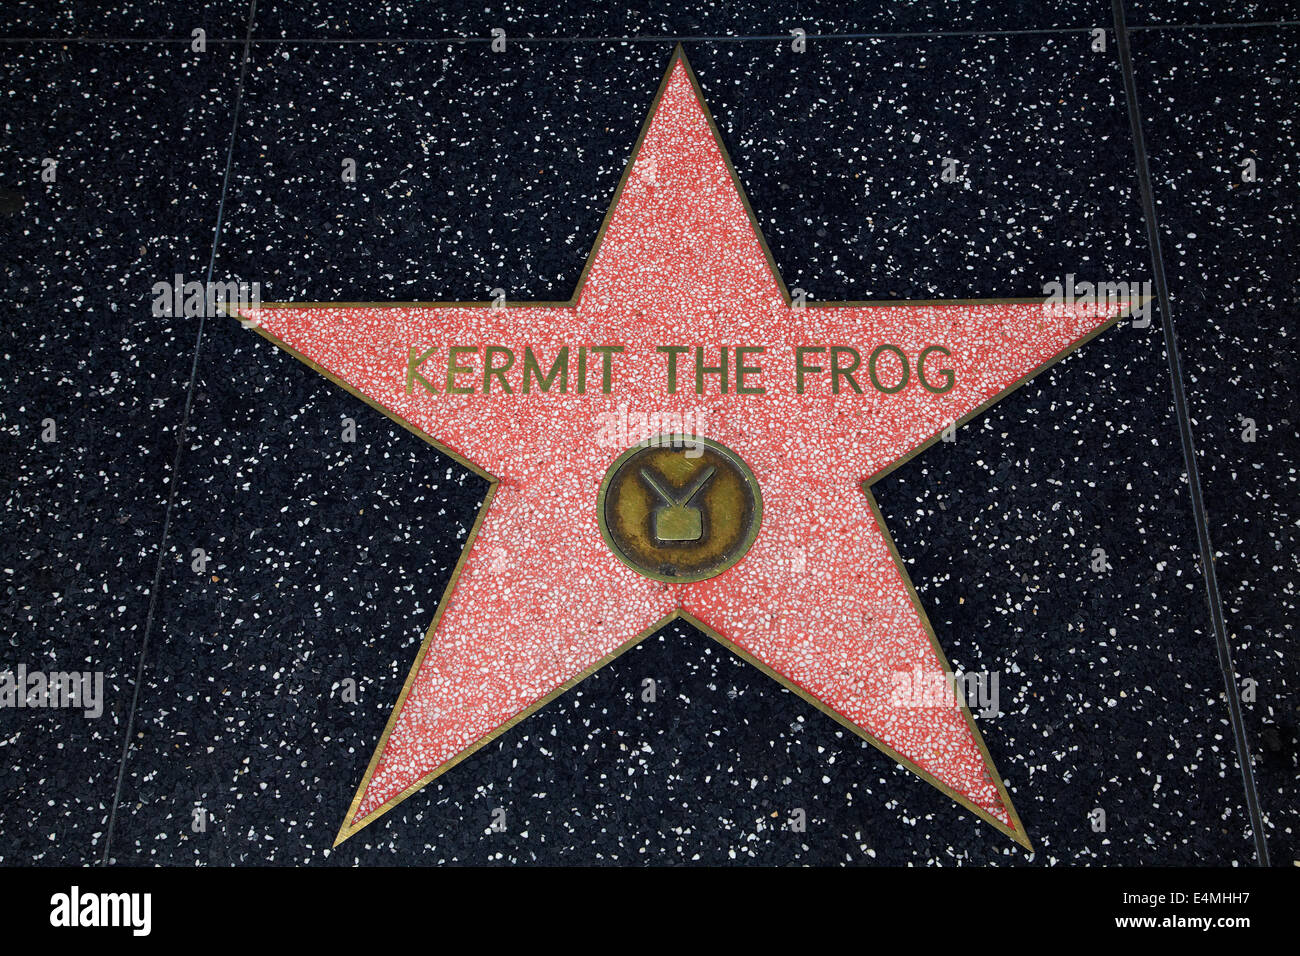 Kermit the Frog star on Hollywood Walk of Fame, Hollywood Boulevard, Hollywood, Los Angeles, California, USA Stock Photo